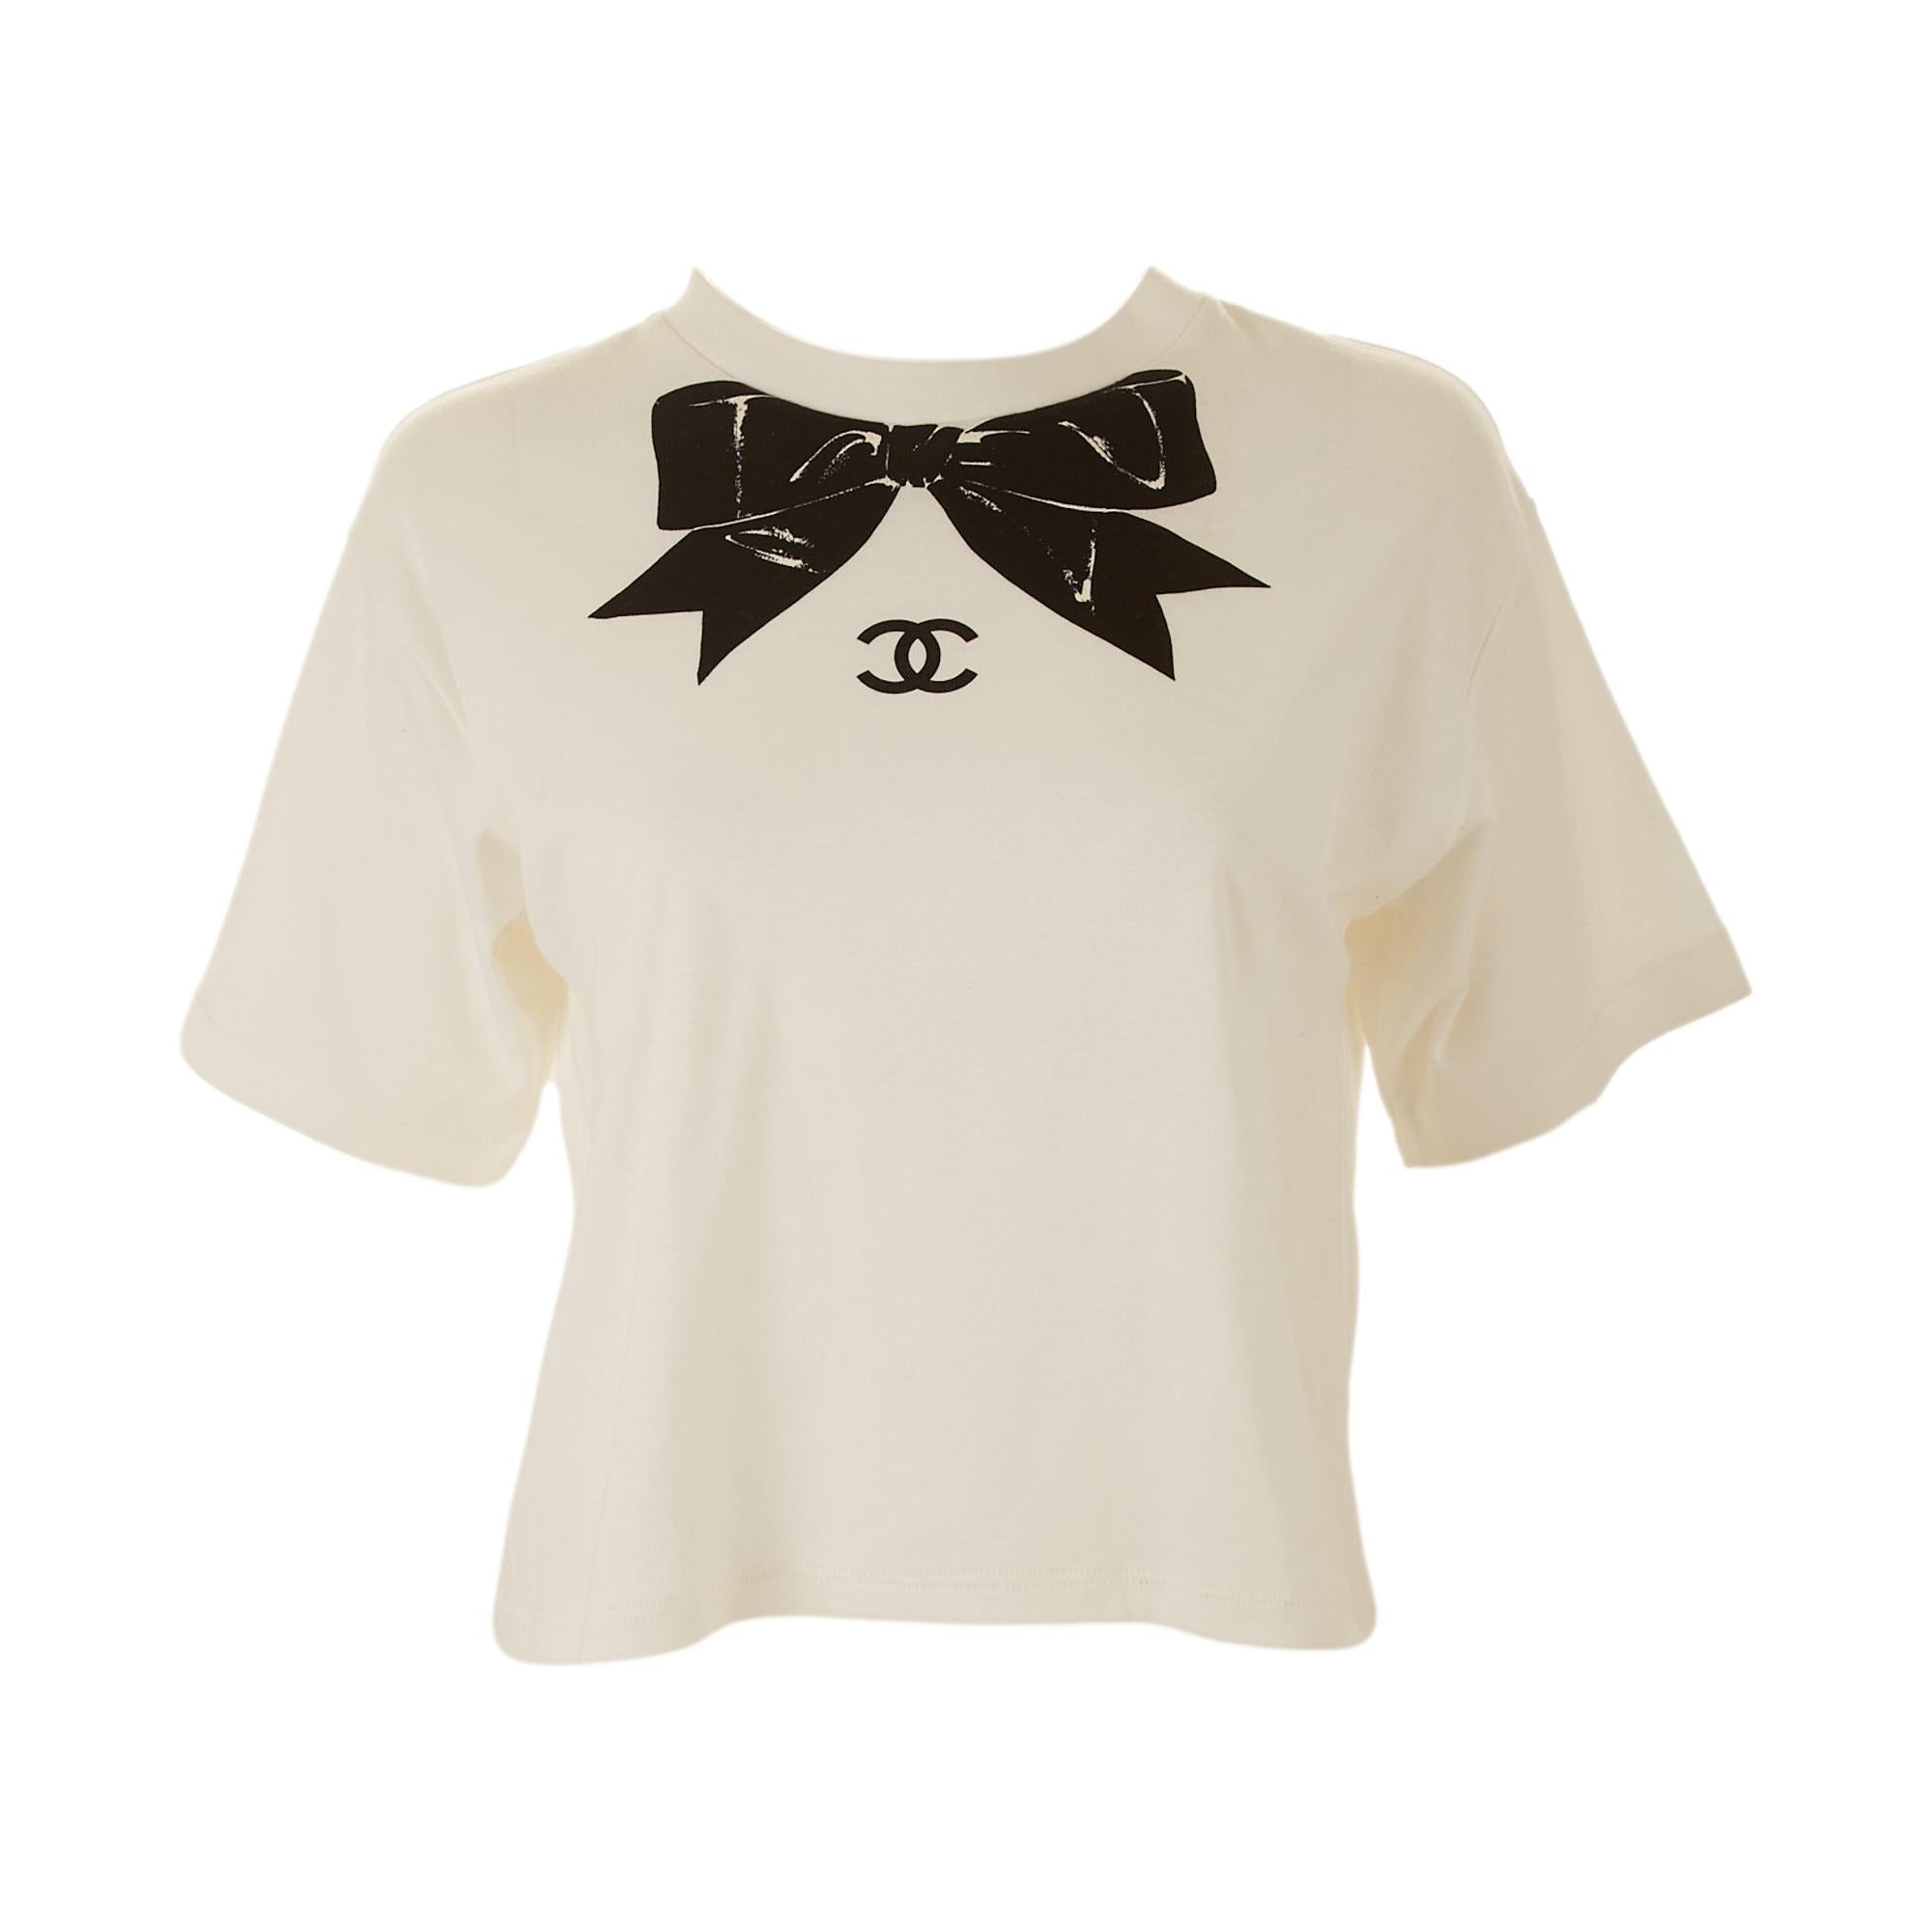 chanel white bow